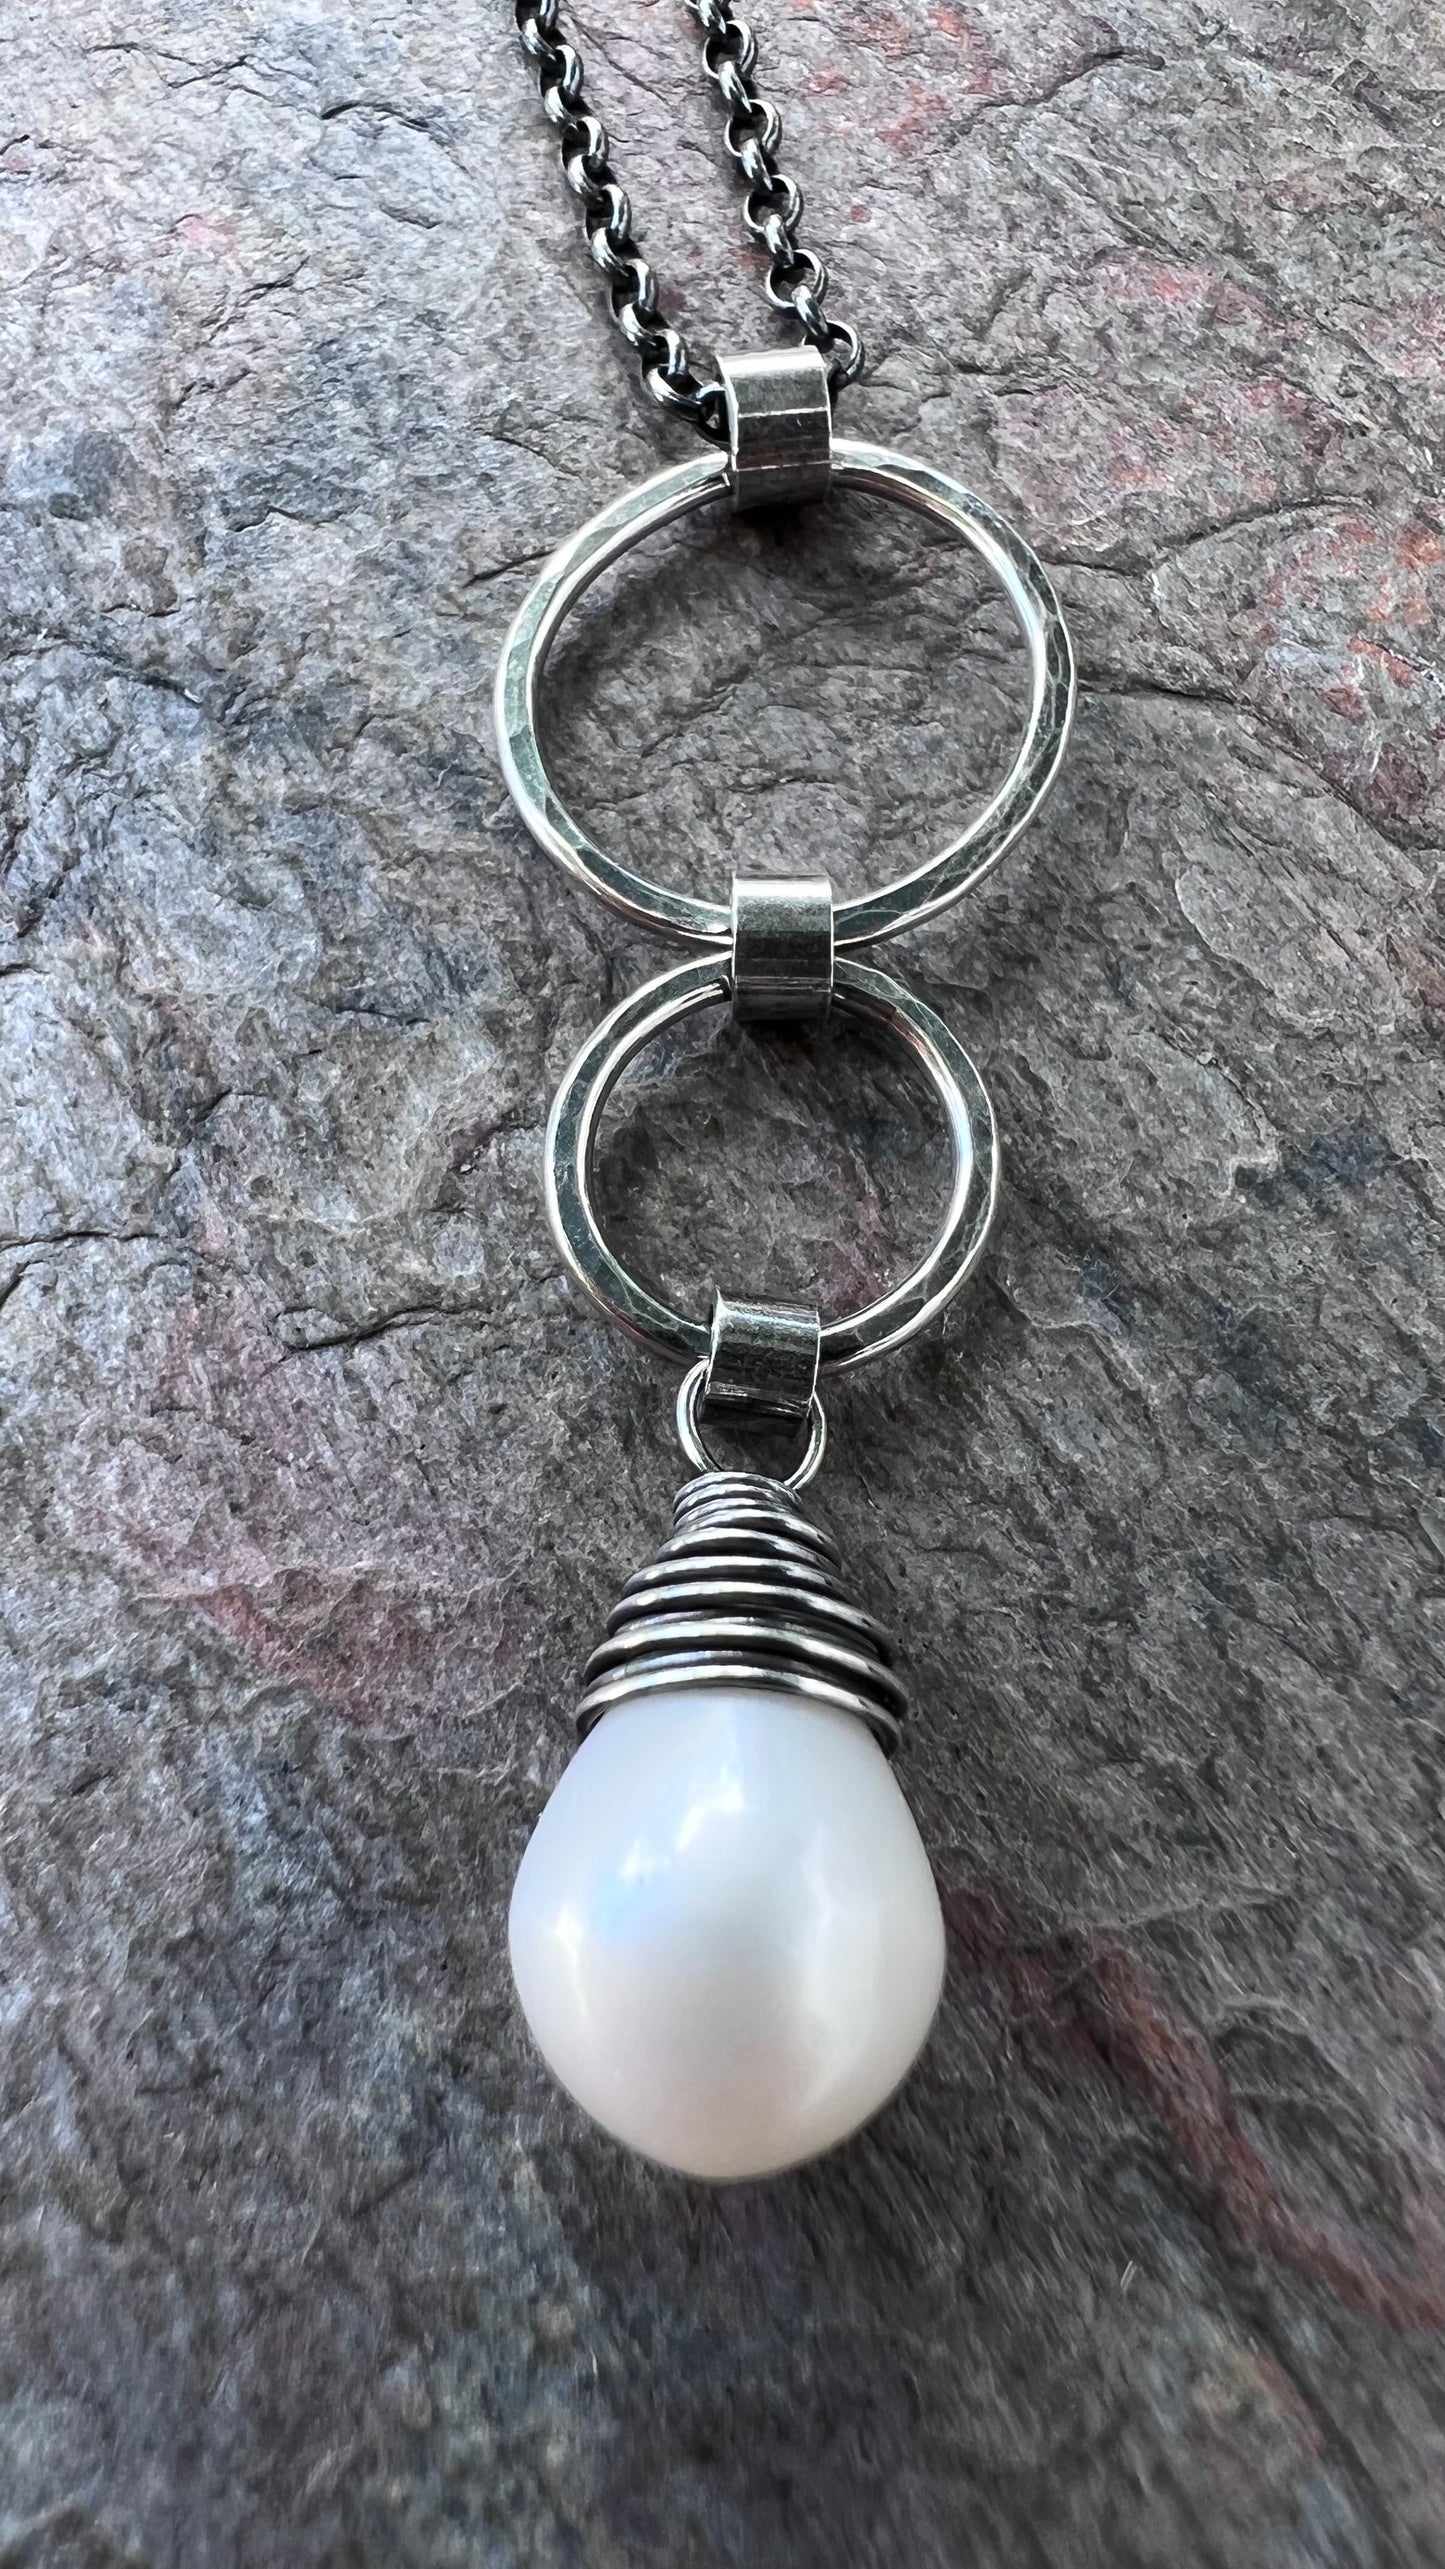 Sterling Silver Pearl Necklace - Genuine Freshwater Pearl and Hammered Silver Rings Pendant on Sterling Silver Chain